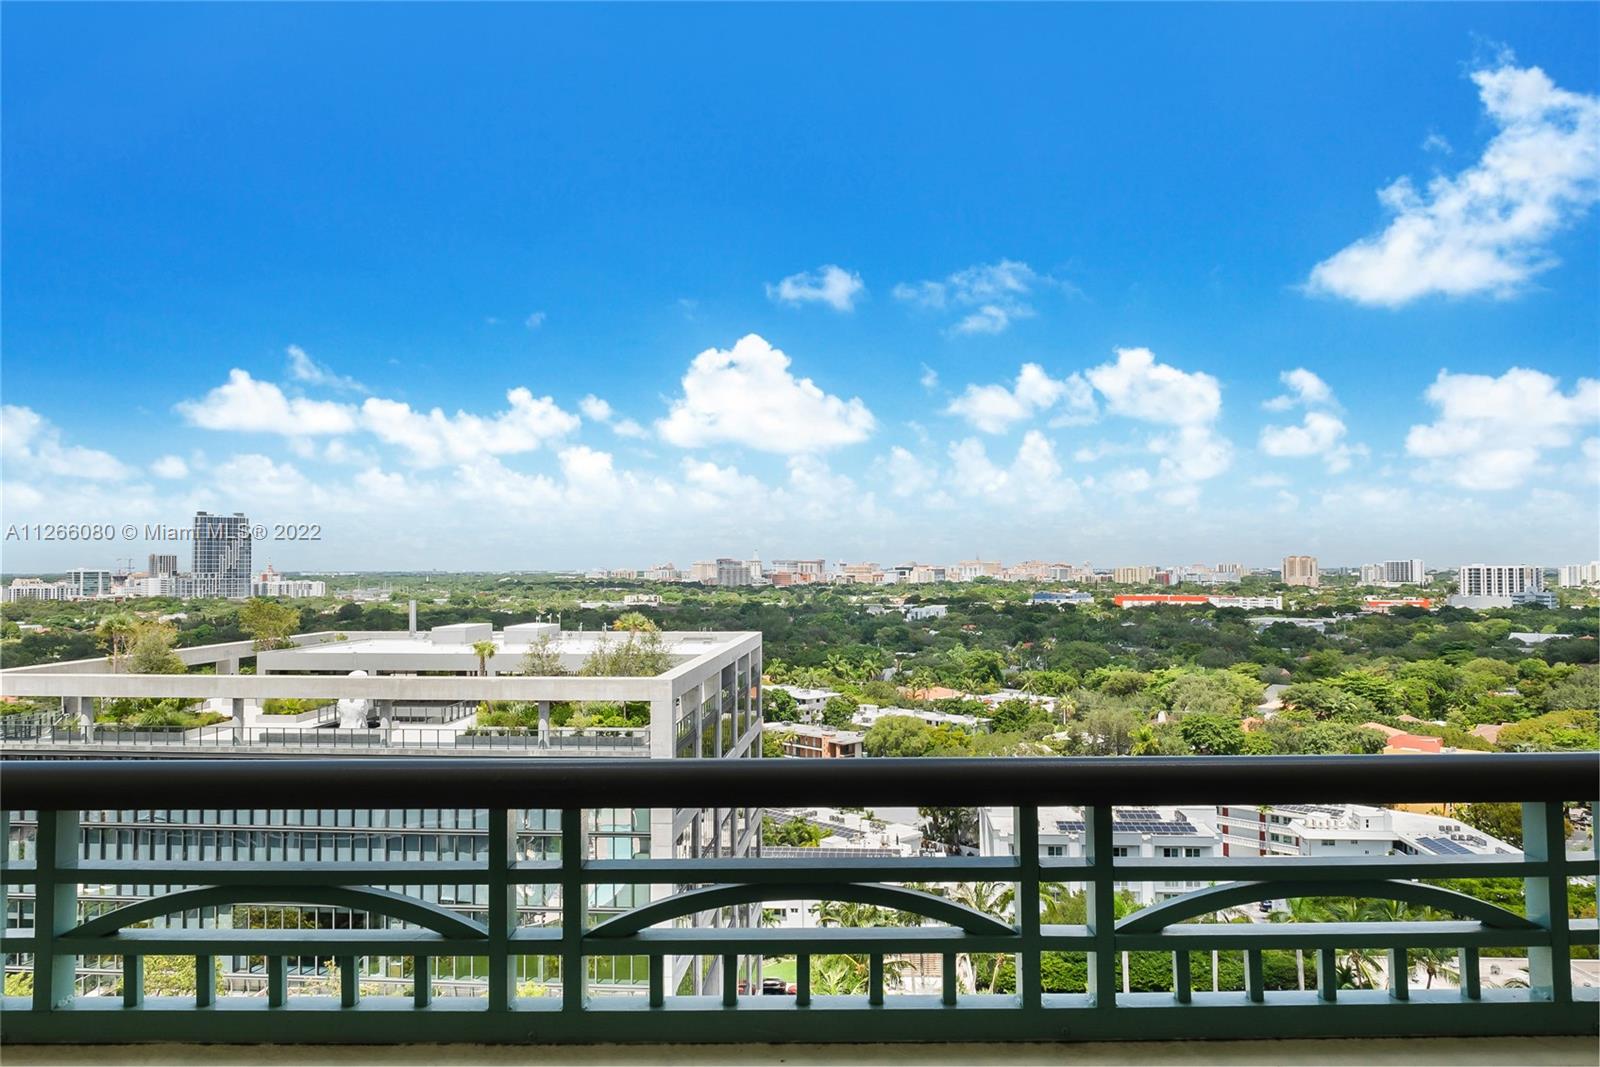 Newly renovated, featuring two large master suites at the Ritz-Carlton Tower Residences, this unit has new flooring, a brand new kitchen, state-of-the-art electric blackout & sheer shades in both bedrooms, custom lighting, and comes exquisitely furnished with all new high-end designer furniture and accessories. Enjoy breathtaking views of the Coral Gables and Coconut Grove skyline from the ample terrace that runs the length of the apartment, and  full access to all 5-star hotel amenities including spa, two pools, fitness enter, Isabelle restaurant, Commodore Club lounge, room service, 24-hour concierge, and assigned and valet parking. Walk to all the restaurants, shops, and entertainment of exciting, revitalized Coconut Grove. The Ritz-Carlton is the perfect place to call home. A must see!